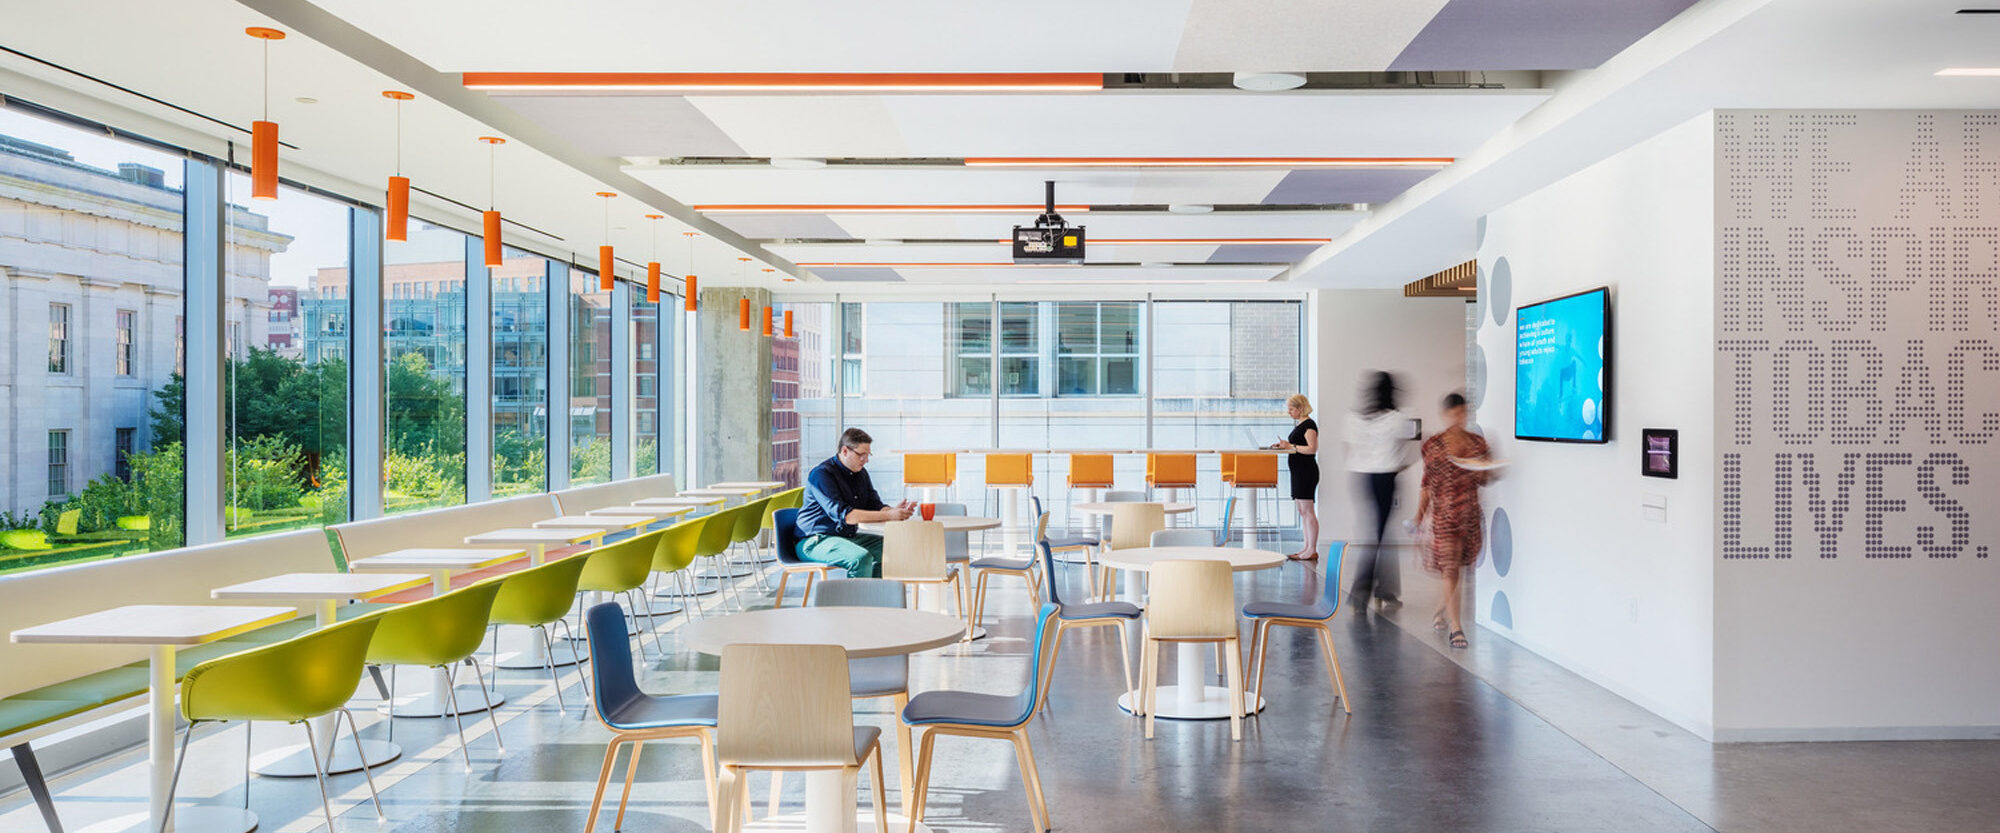 Bright, modern office break area with floor-to-ceiling windows, offering ample natural light. White tables with colorful chairs in green and blue hues complement the vibrant orange light fixtures overhead. Interactive LED screen enlivens the space, surrounded by dynamic text wall art, fostering an engaging work environment.